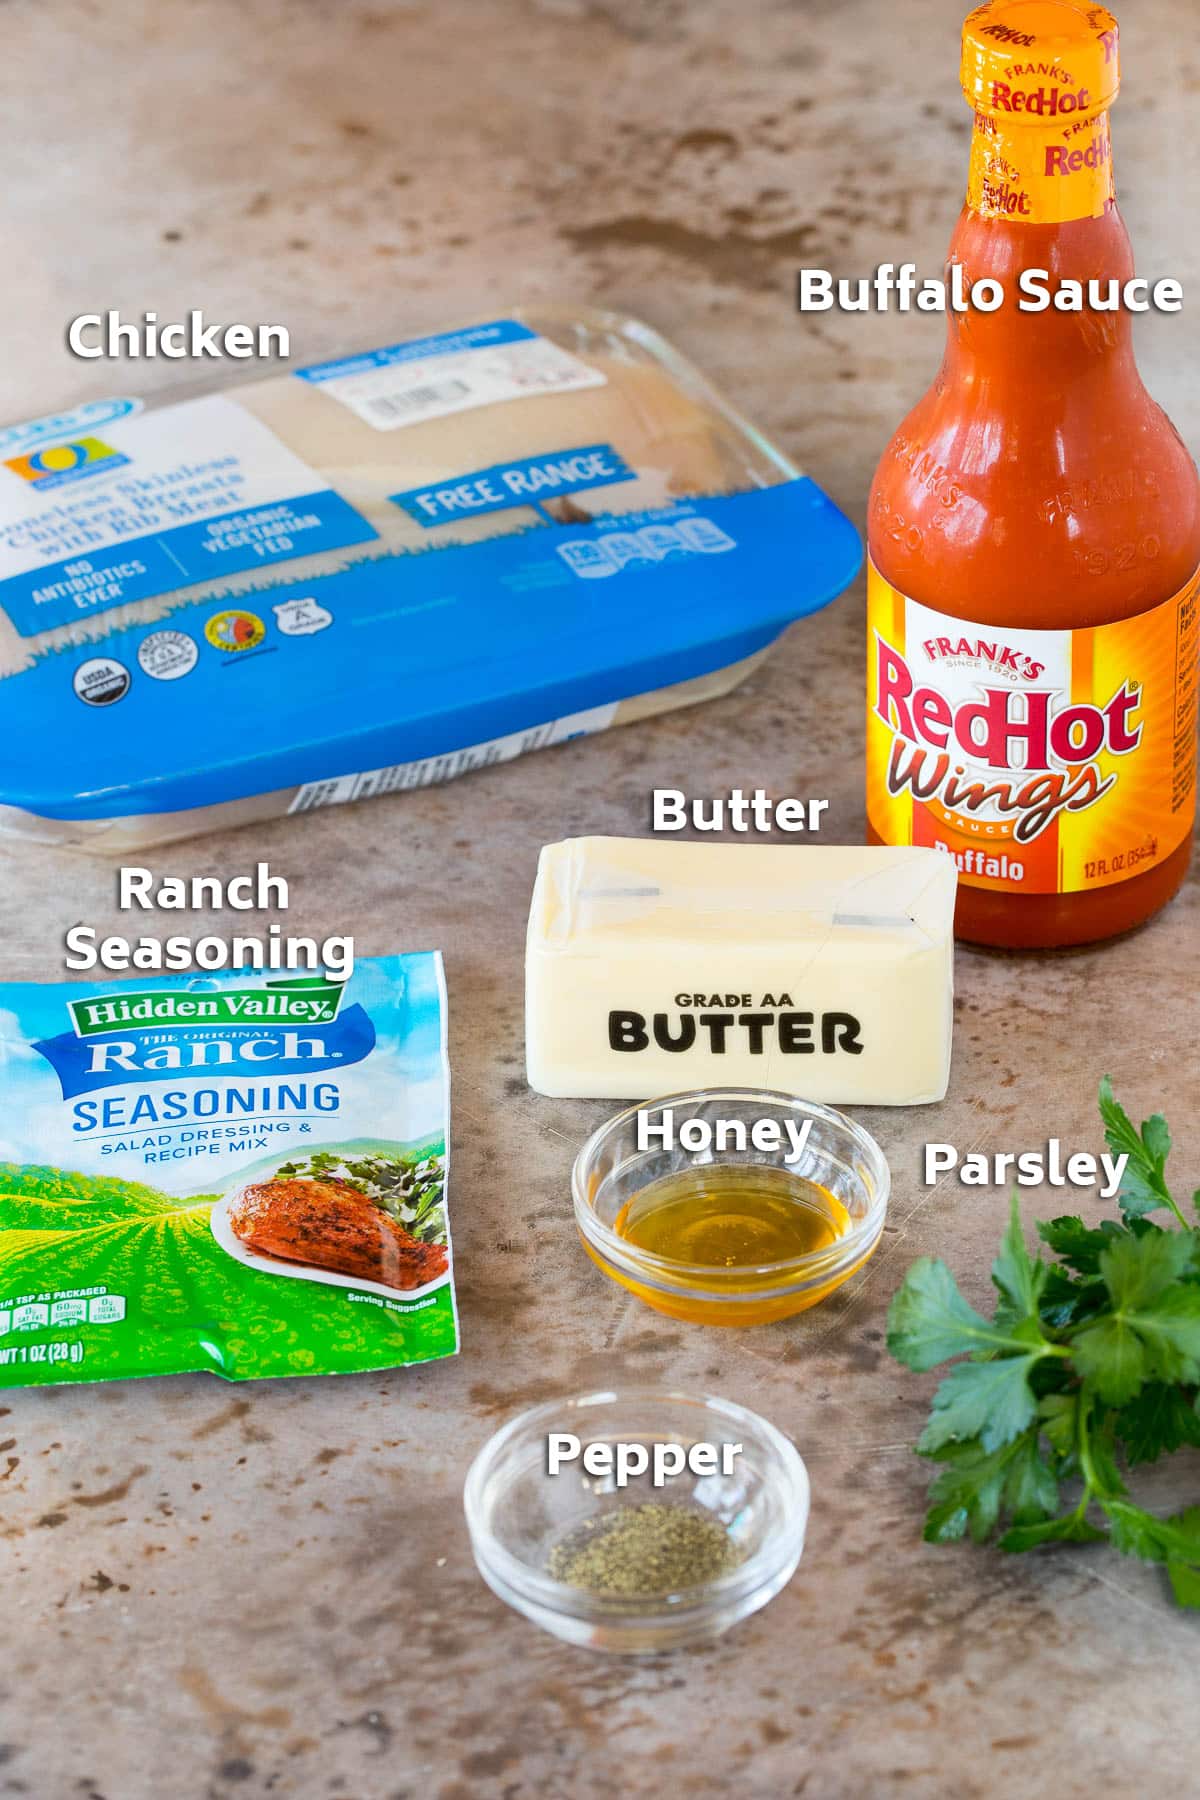 Ingredients including chicken, hot sauce, butter, honey and seasonings.